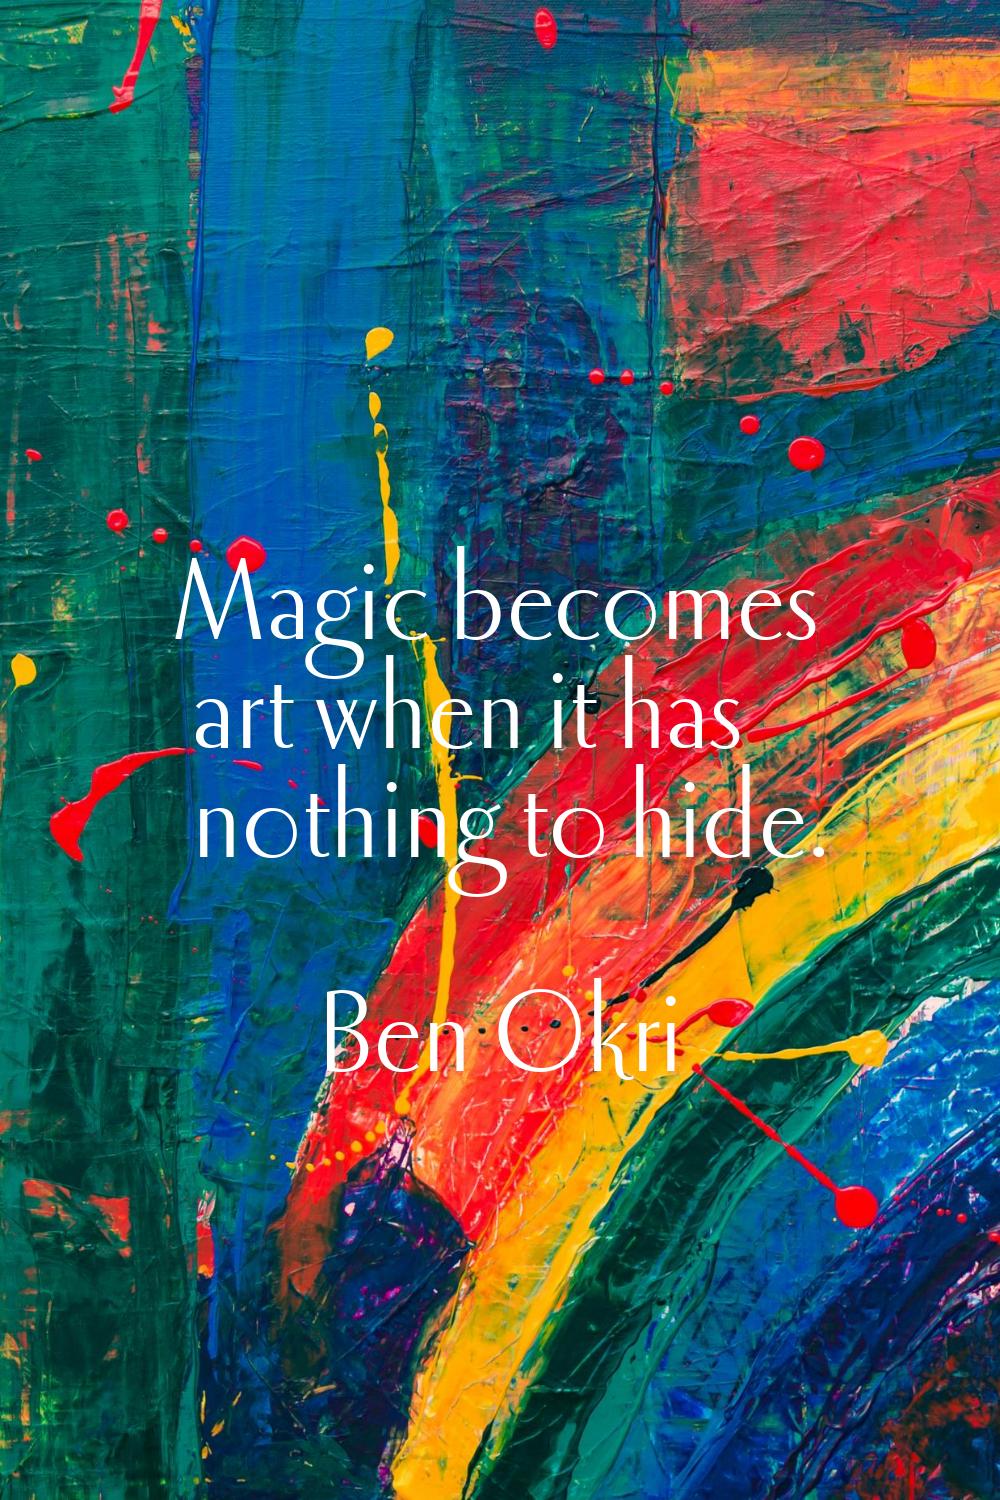 Magic becomes art when it has nothing to hide.